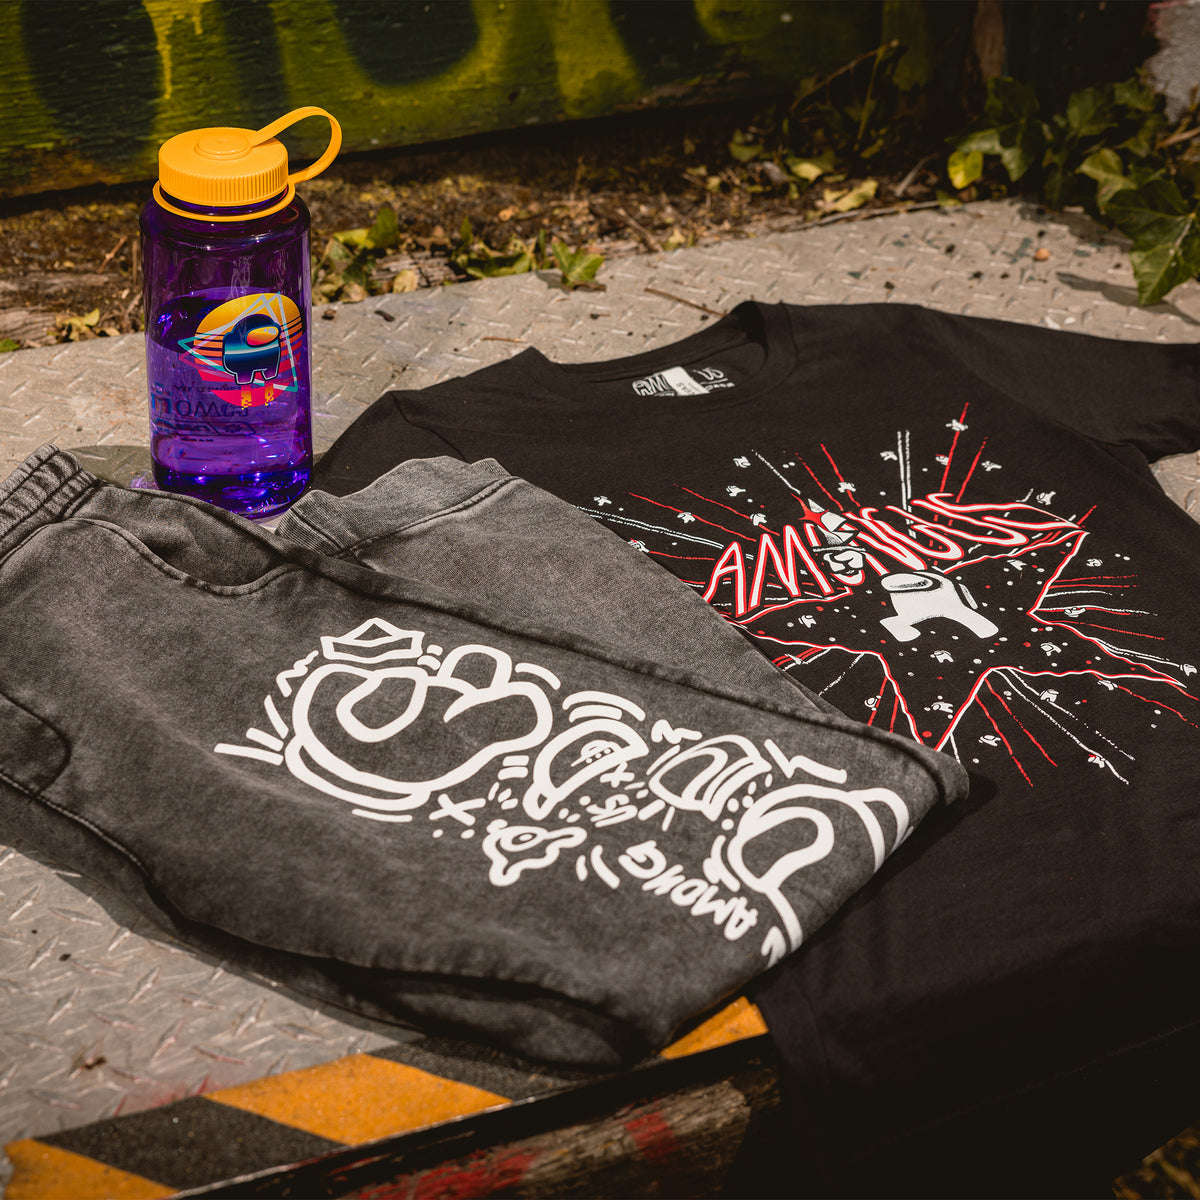 The Crewmate water bottle beside the Among Us 5th Anniversary T-Shirt and Crewmate Joggers.